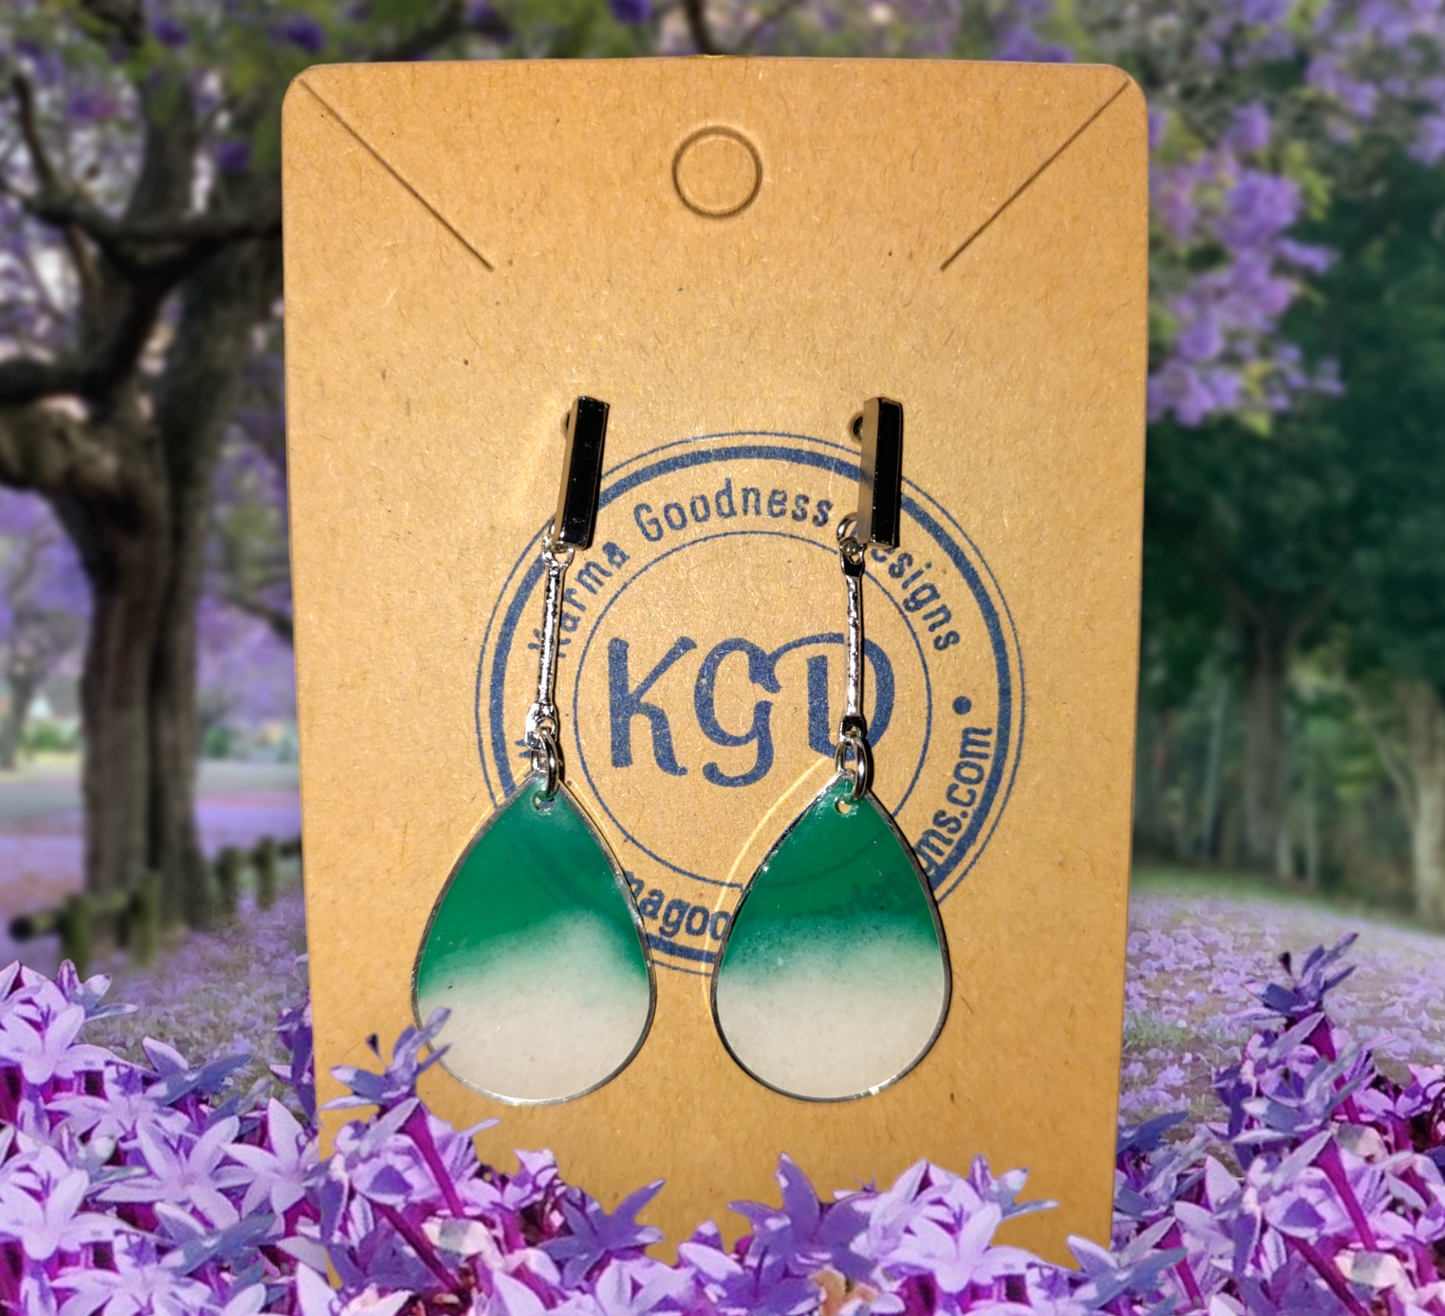 Gulf Sands Emerald Isle earrings from Karma Goodness Designs